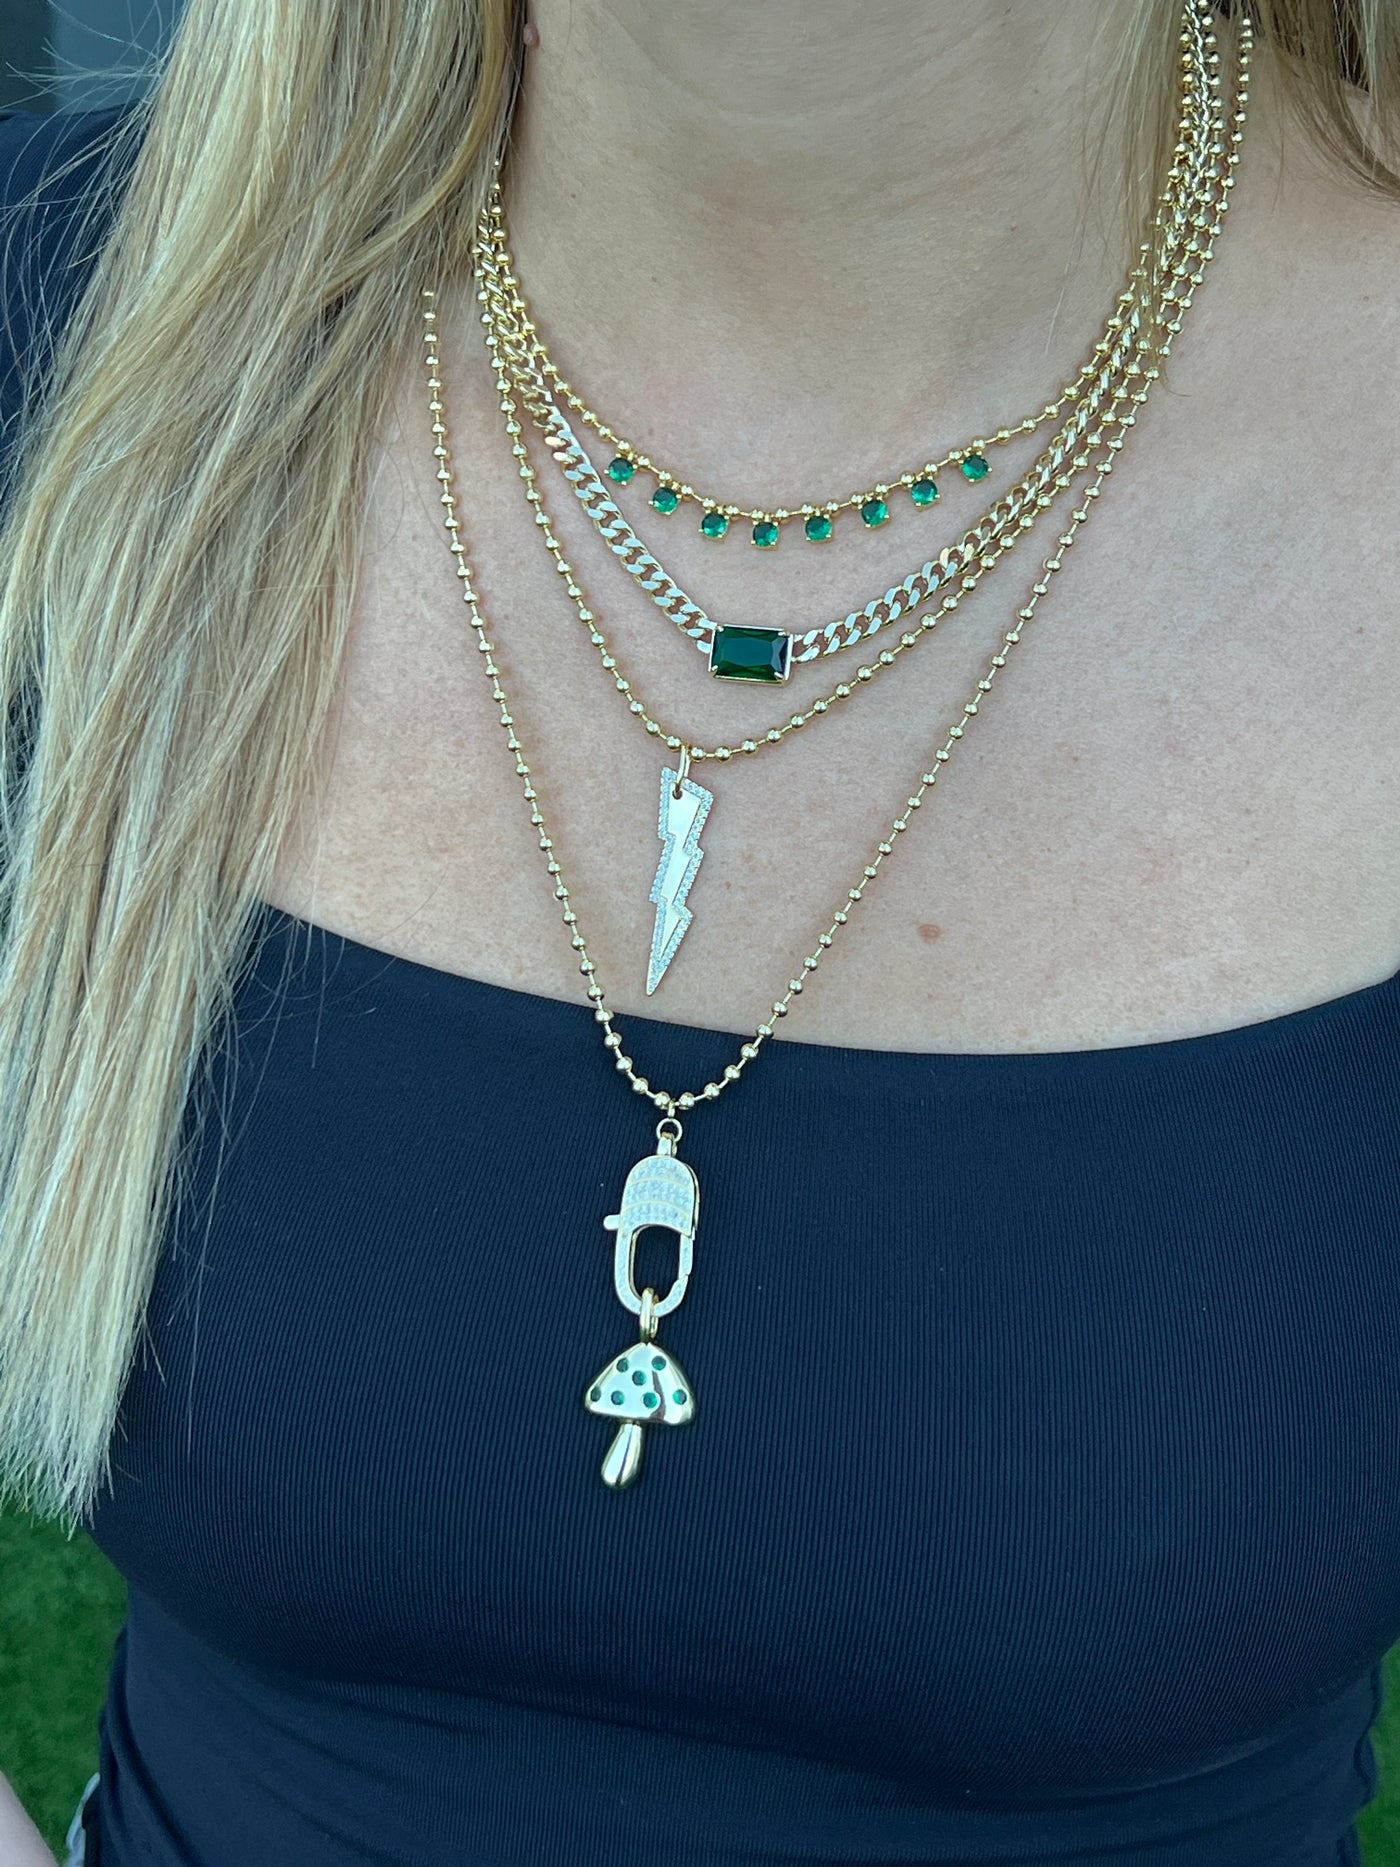 The Emerald Cuban Chain Necklace